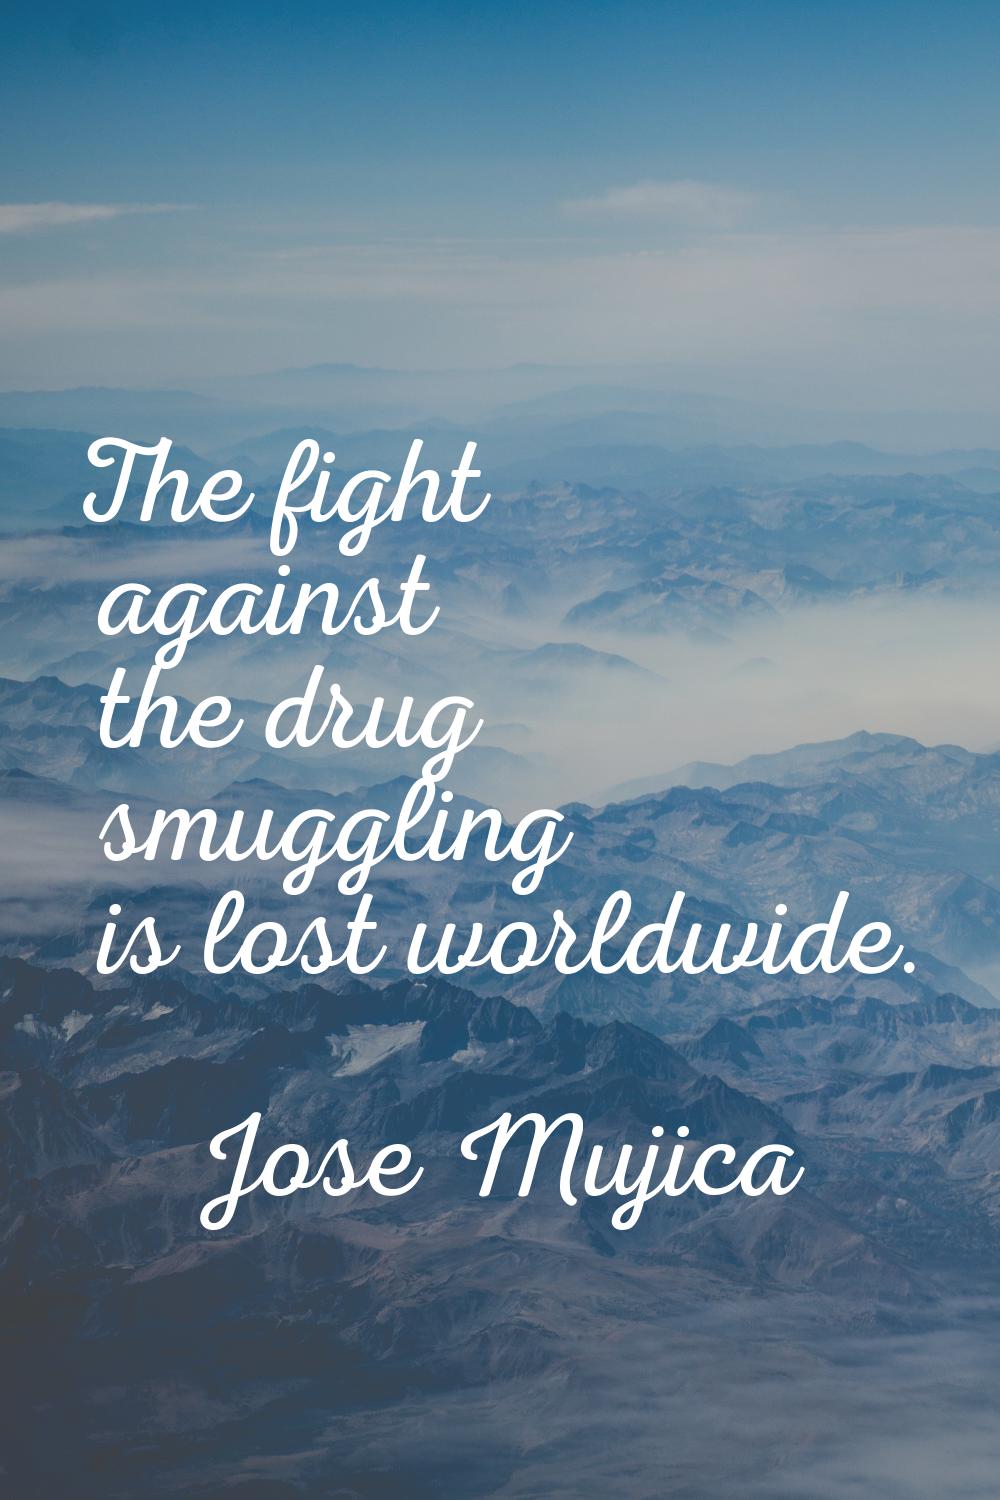 The fight against the drug smuggling is lost worldwide.